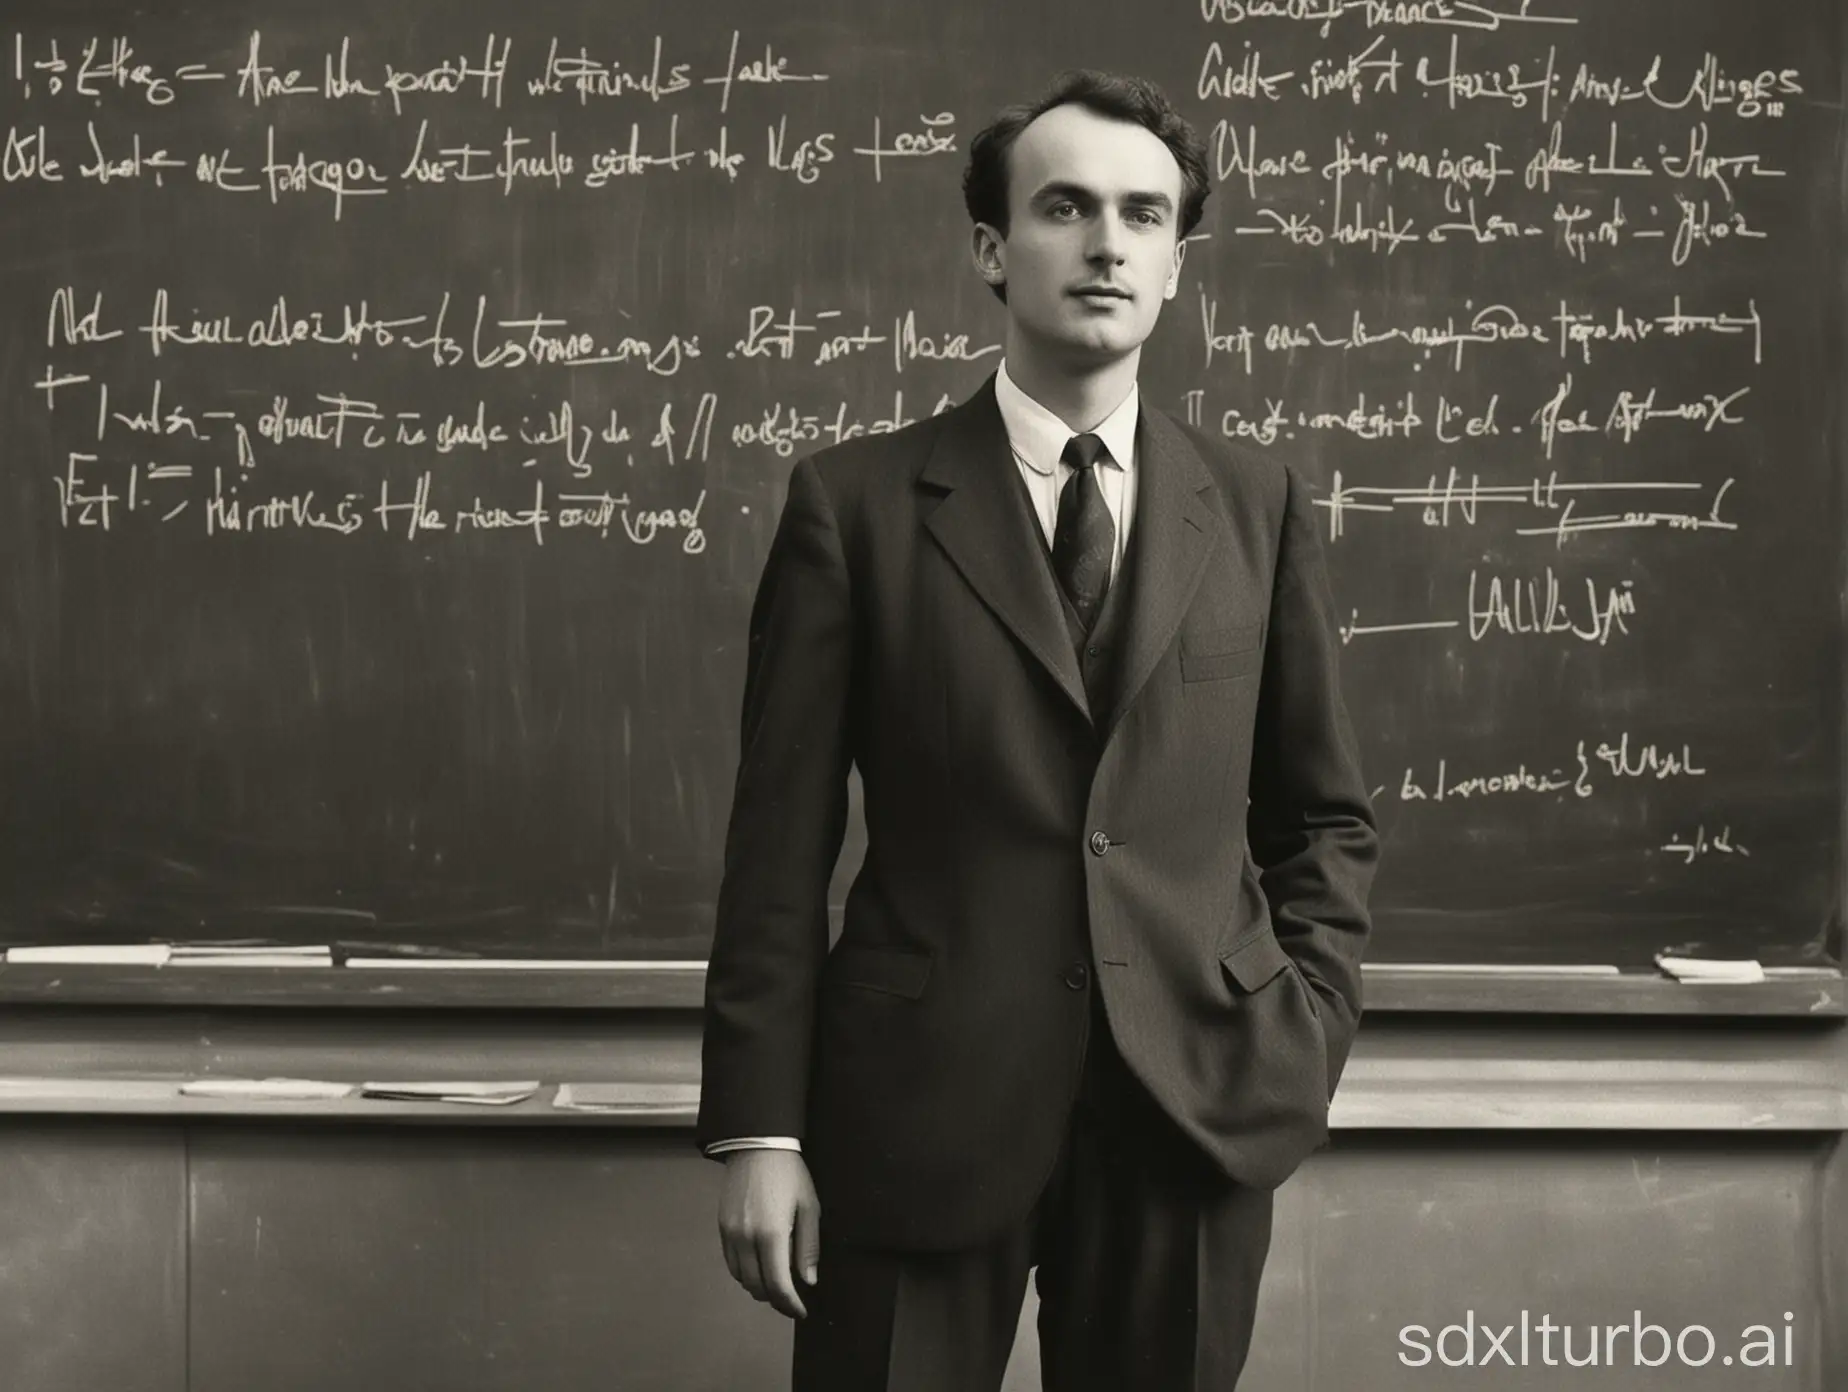 Create a striking image! Paul Dirac has quite a distinguished look with his suit. There's a modern feel to the photograph too, judging by the style of his attire and the vivid-toned coloration. He is in front of a blackboard with handwriten "A physical law must possess mathematical beauty.".